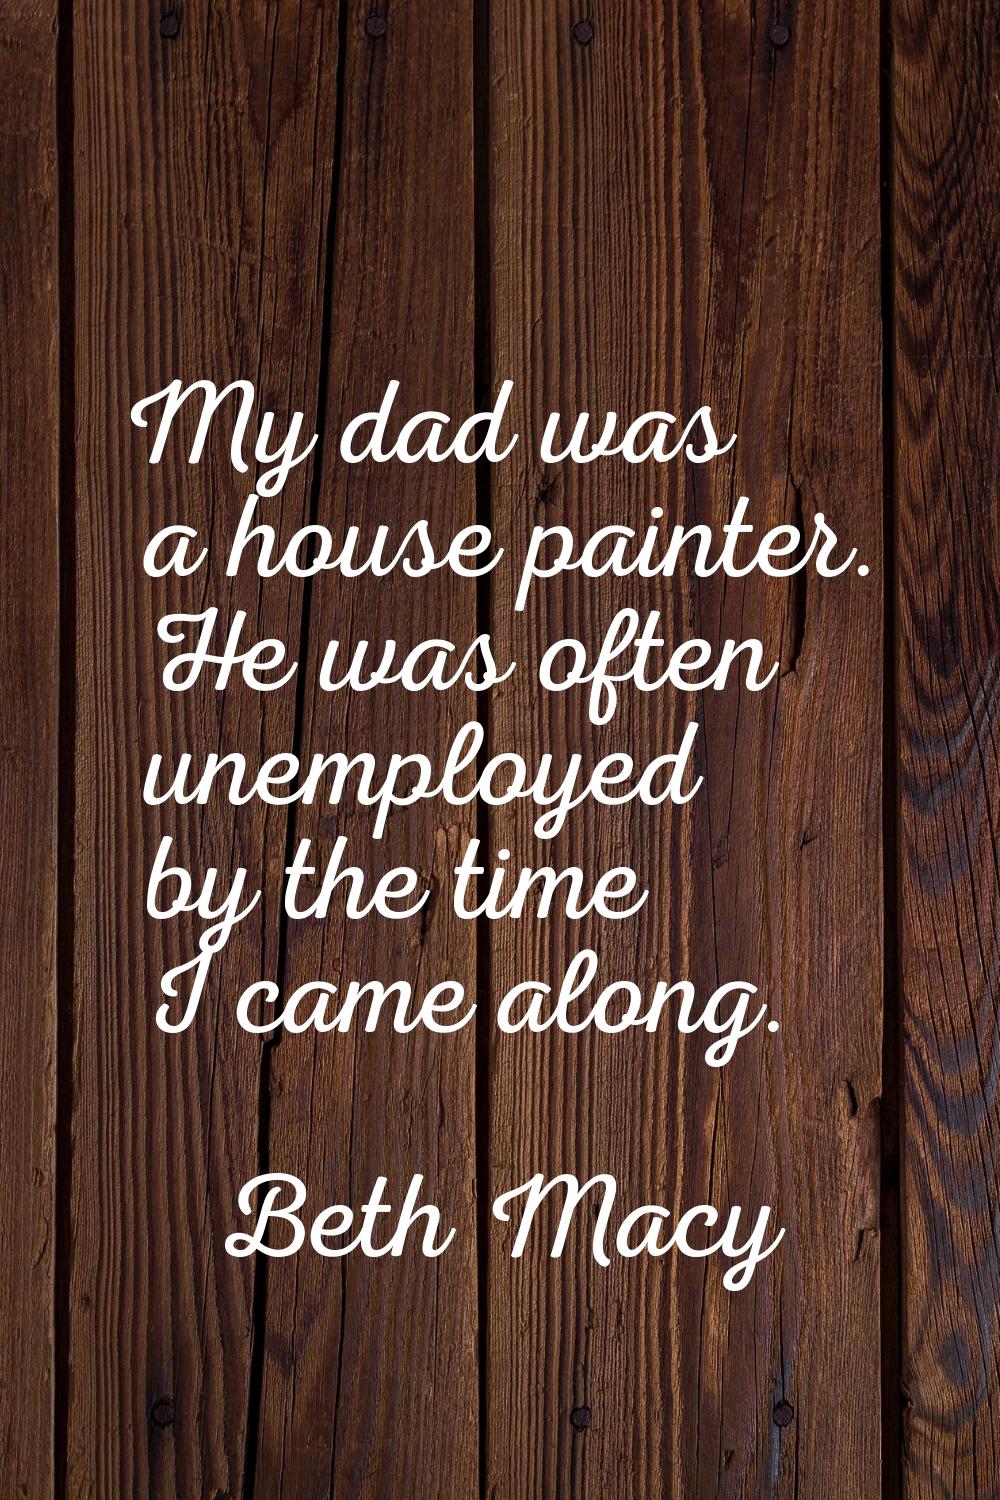 My dad was a house painter. He was often unemployed by the time I came along.